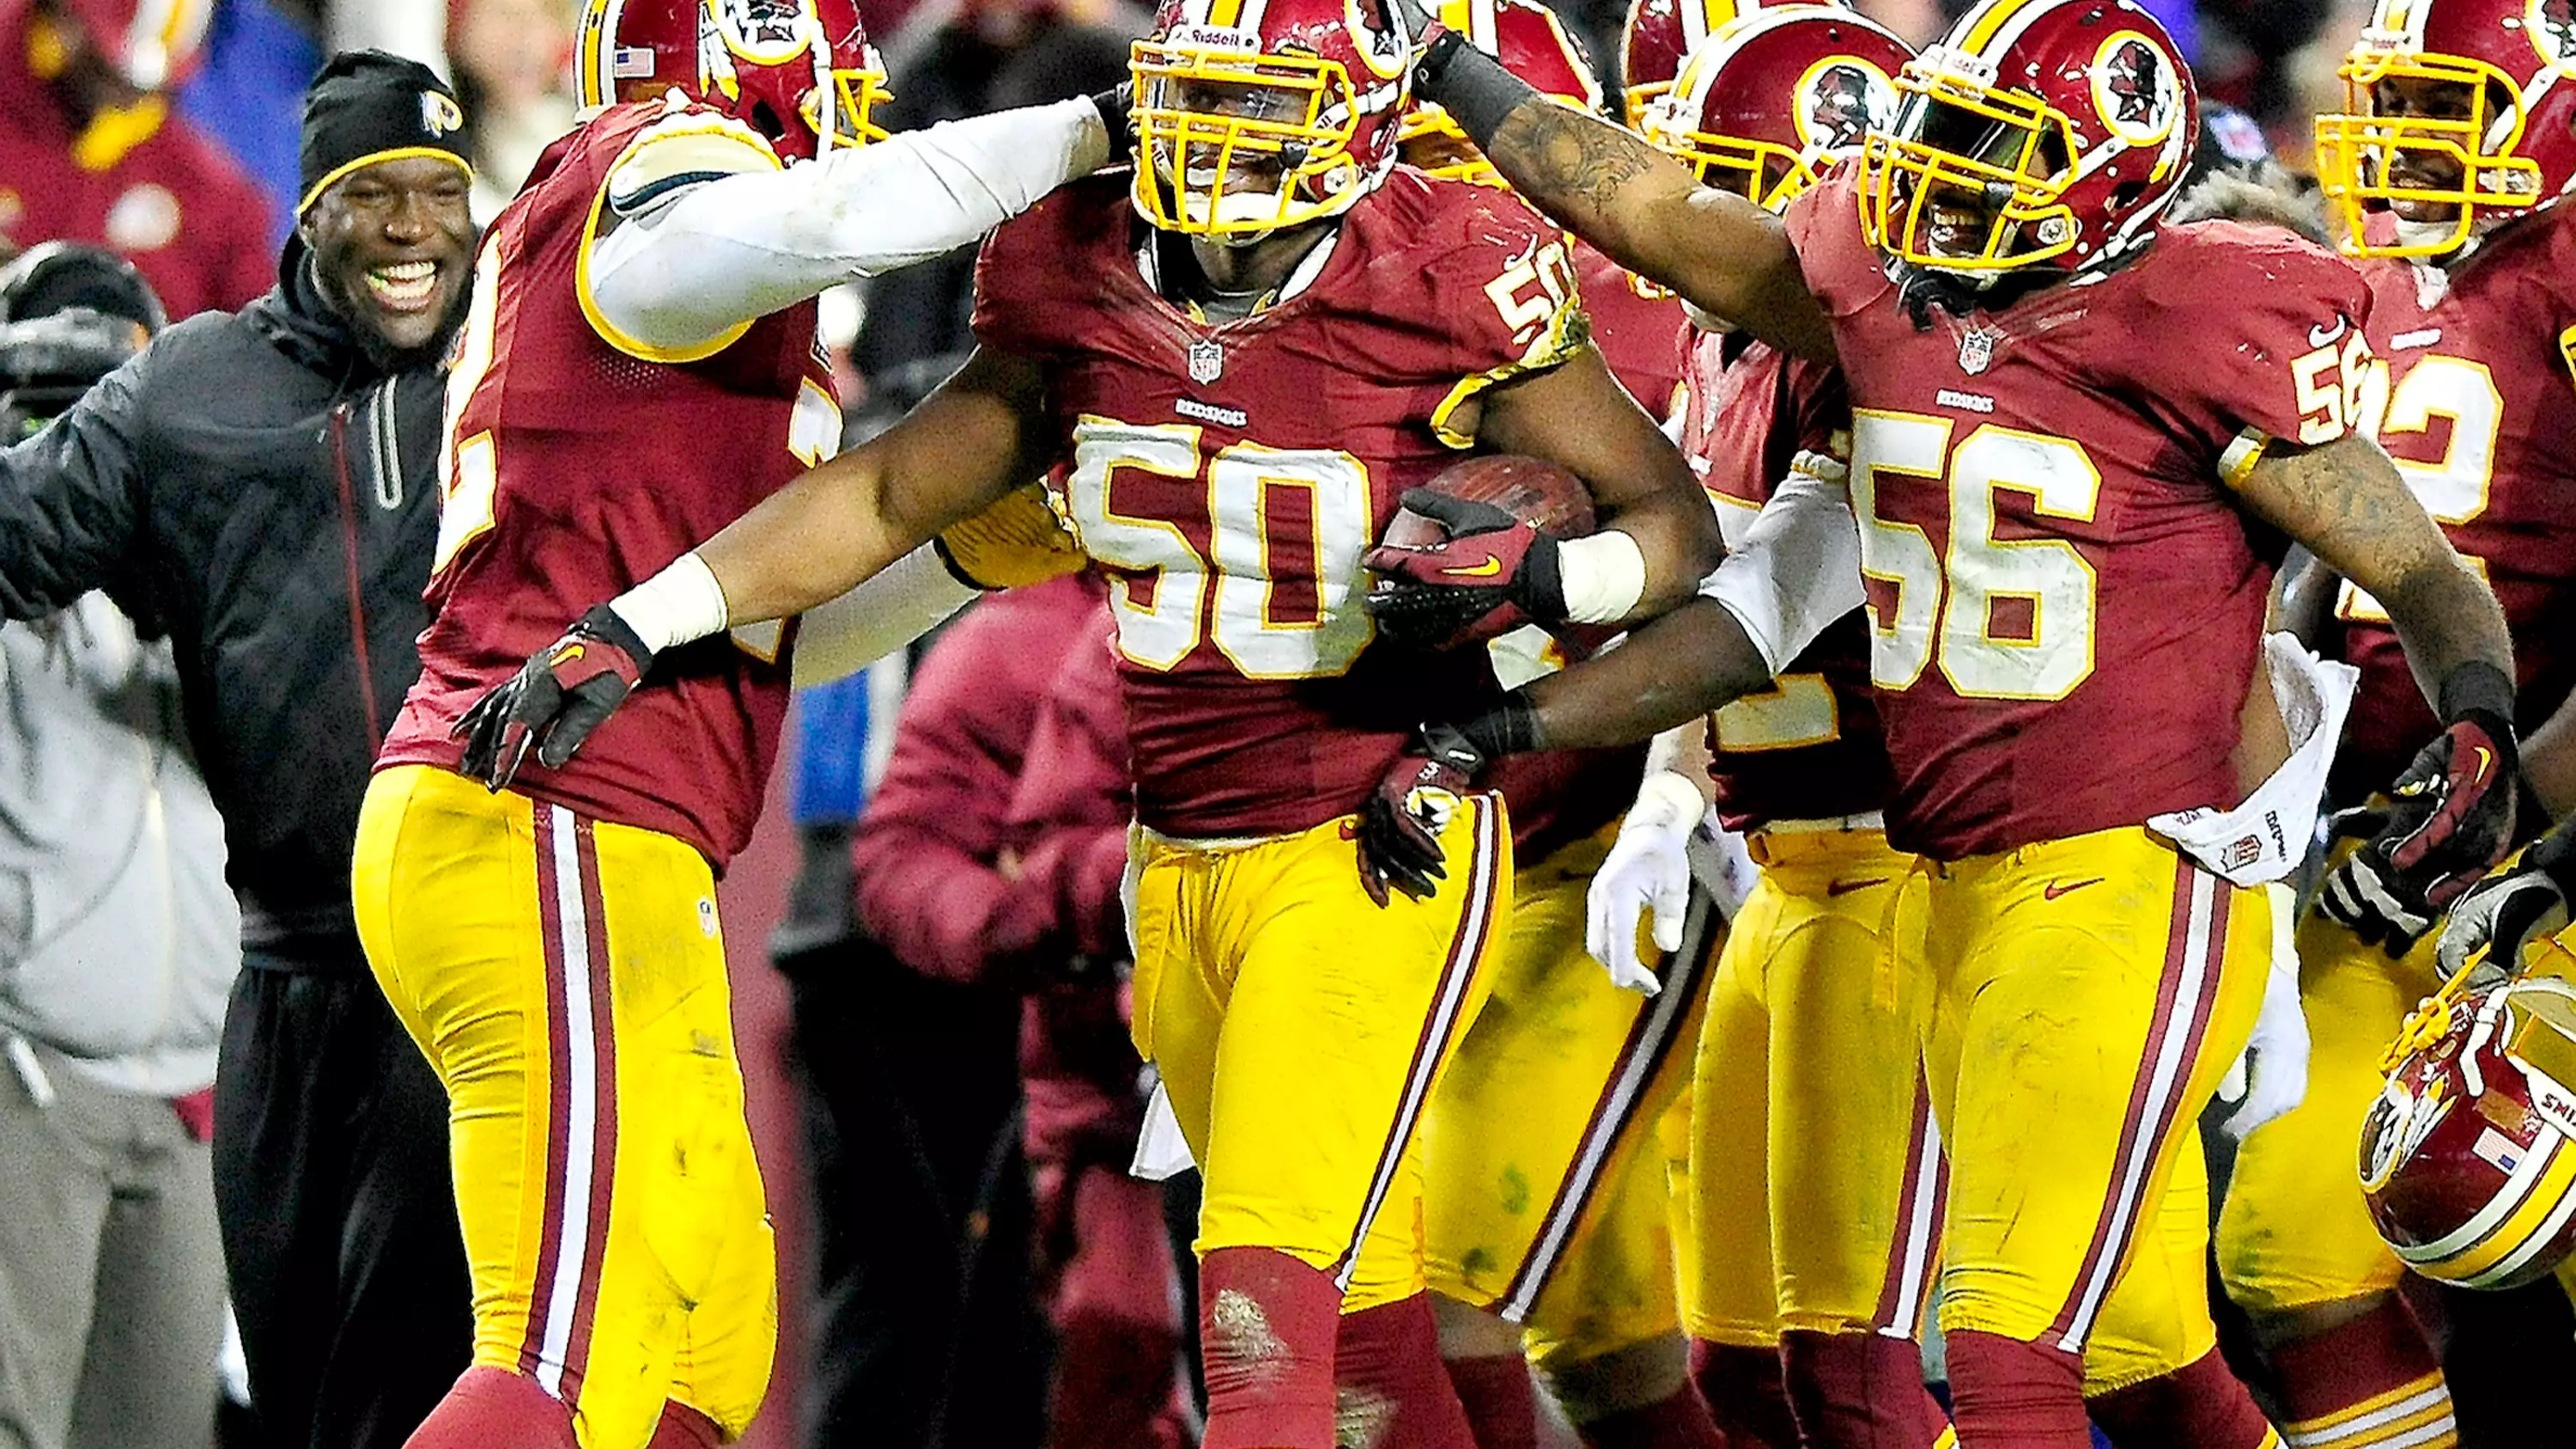 Washington Redskins Confirm They Have Retired Name And Logo